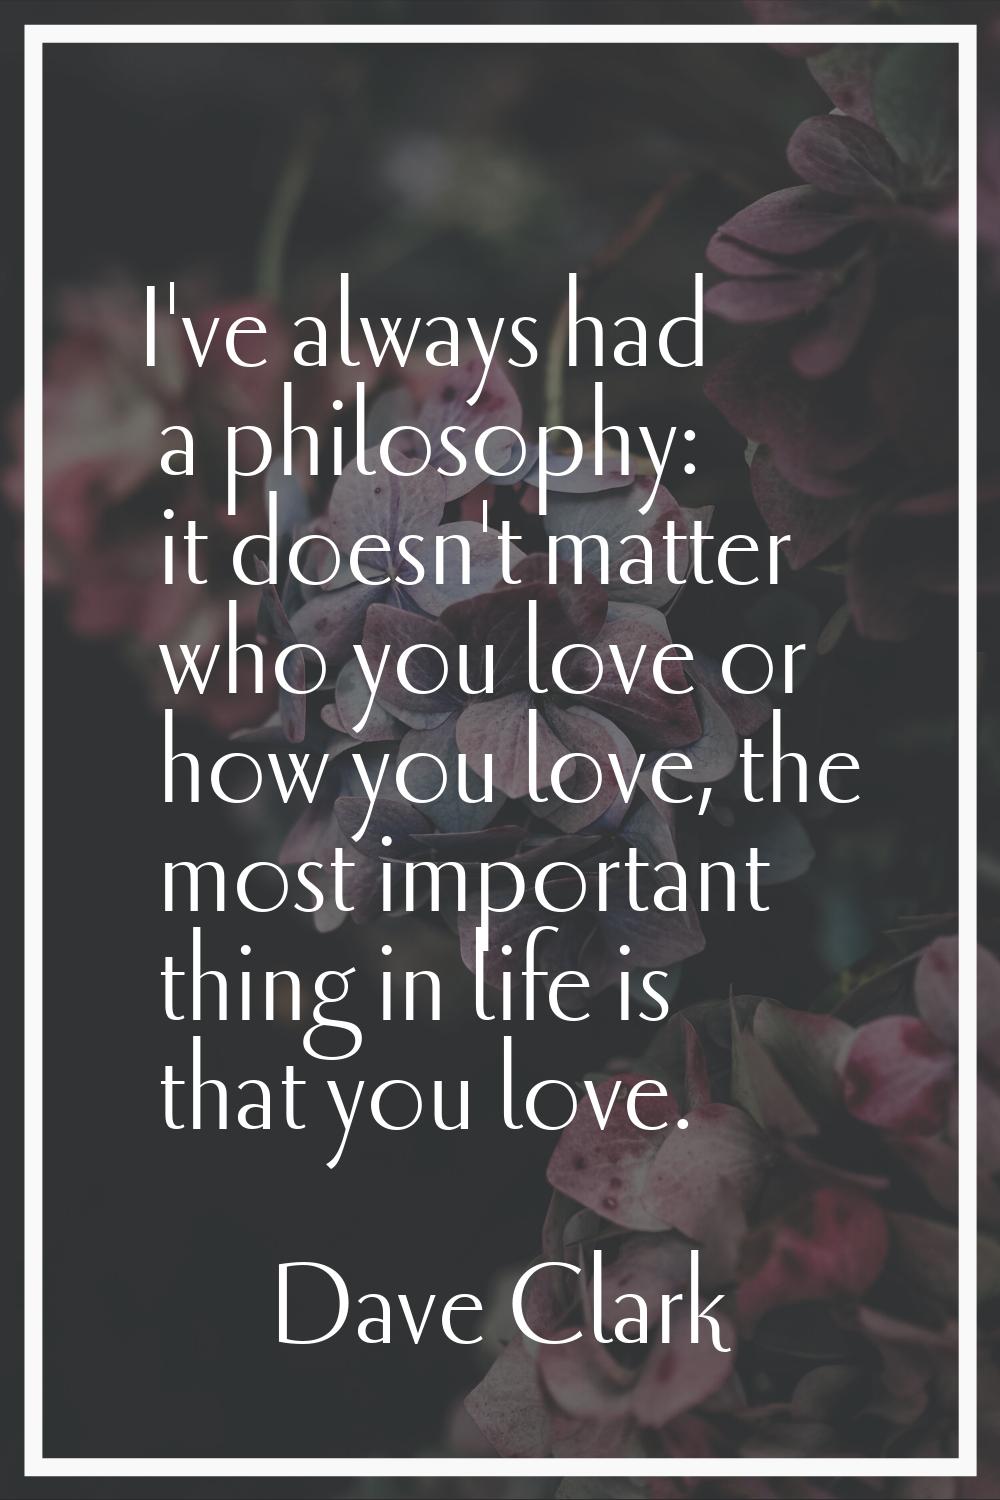 I've always had a philosophy: it doesn't matter who you love or how you love, the most important th